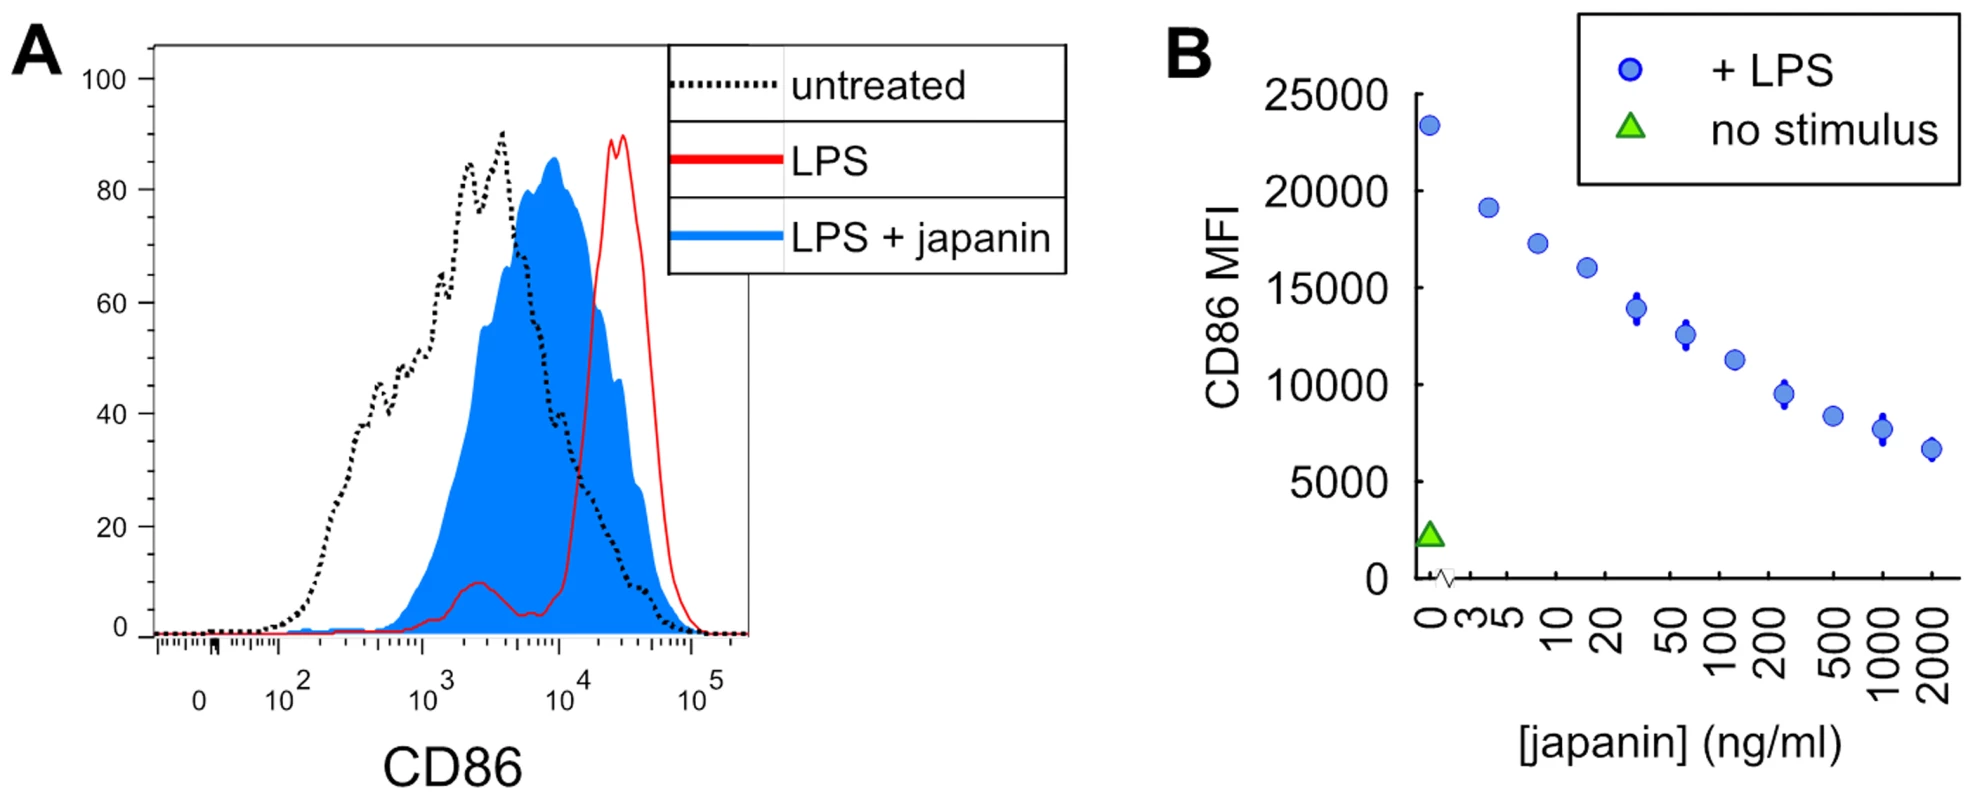 Pretreatment of dendritic cells with Japanin inhibits their upregulation of CD86 in response to LPS.